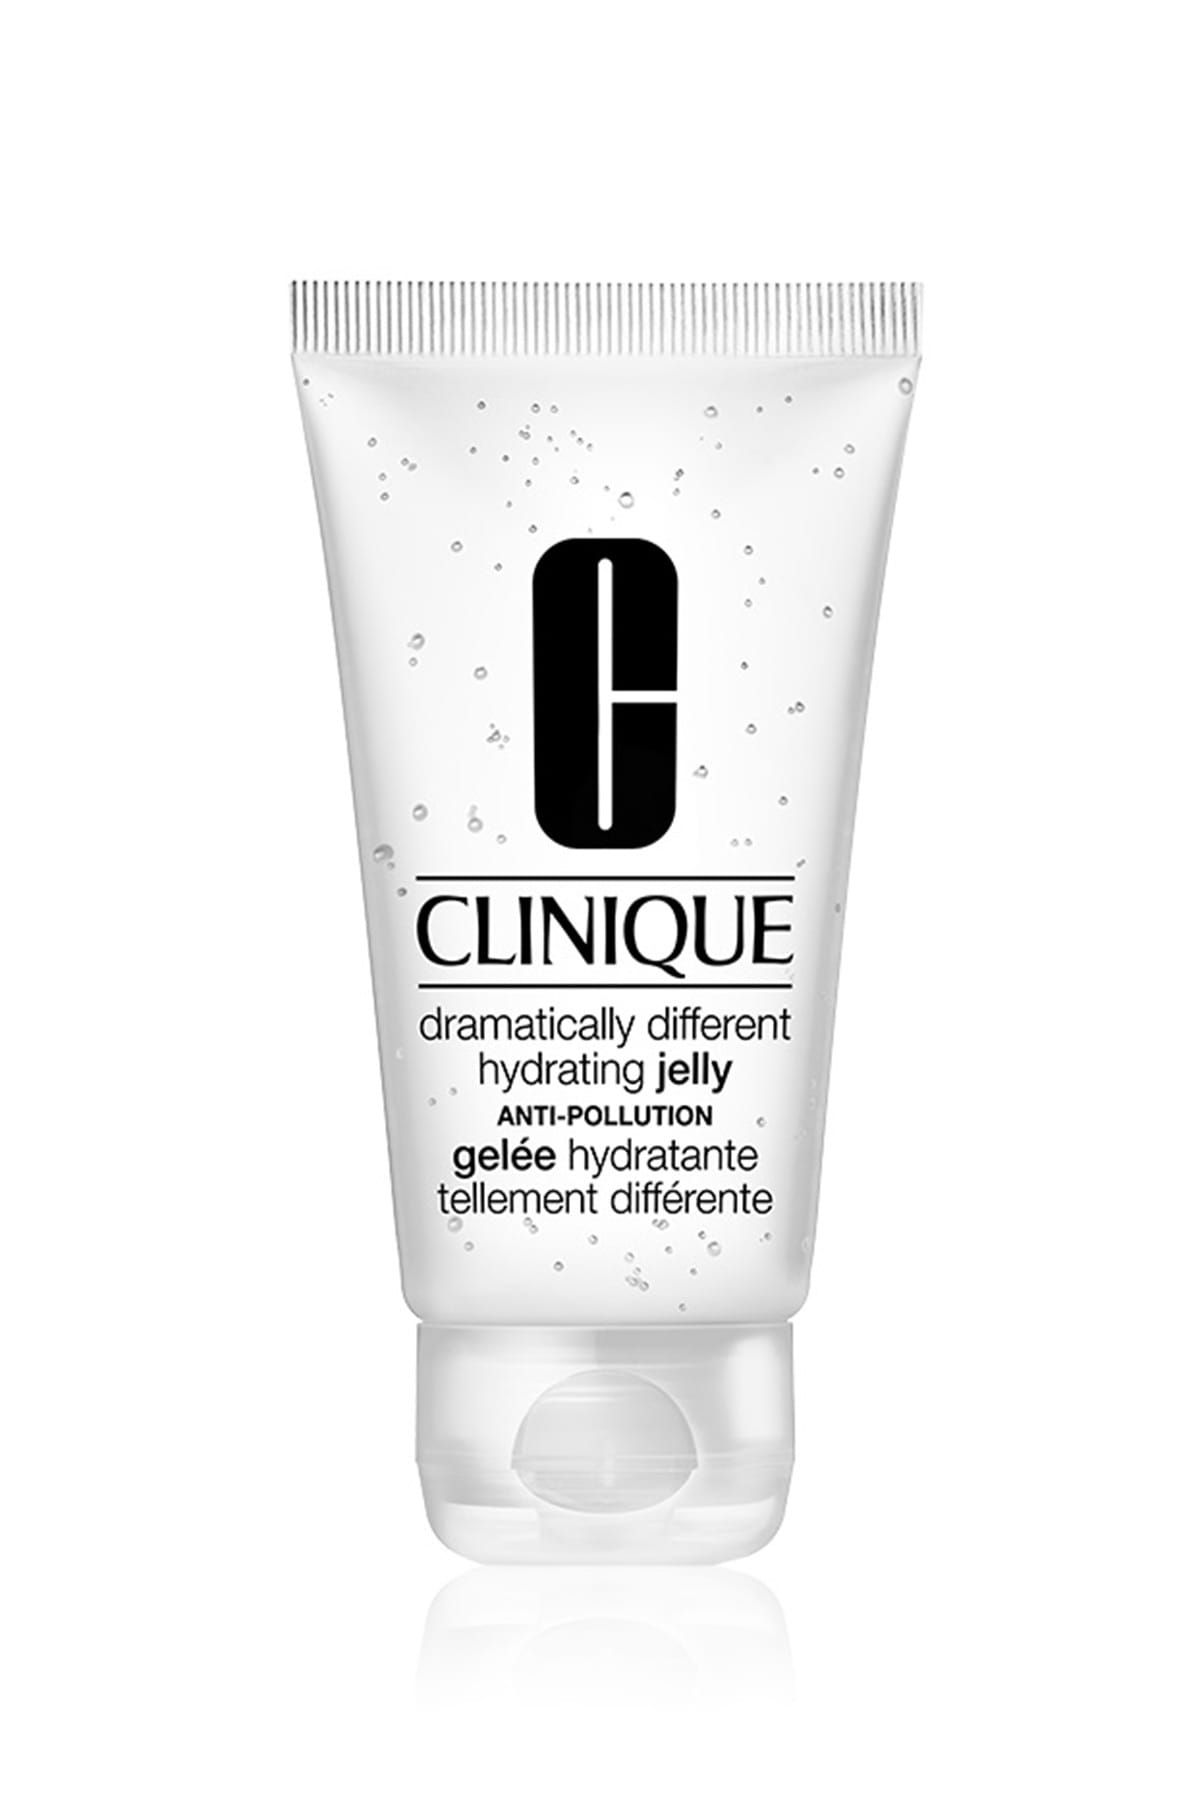 Clinique Dramatically Different Hydrating Jelly 50 ml 020714974817